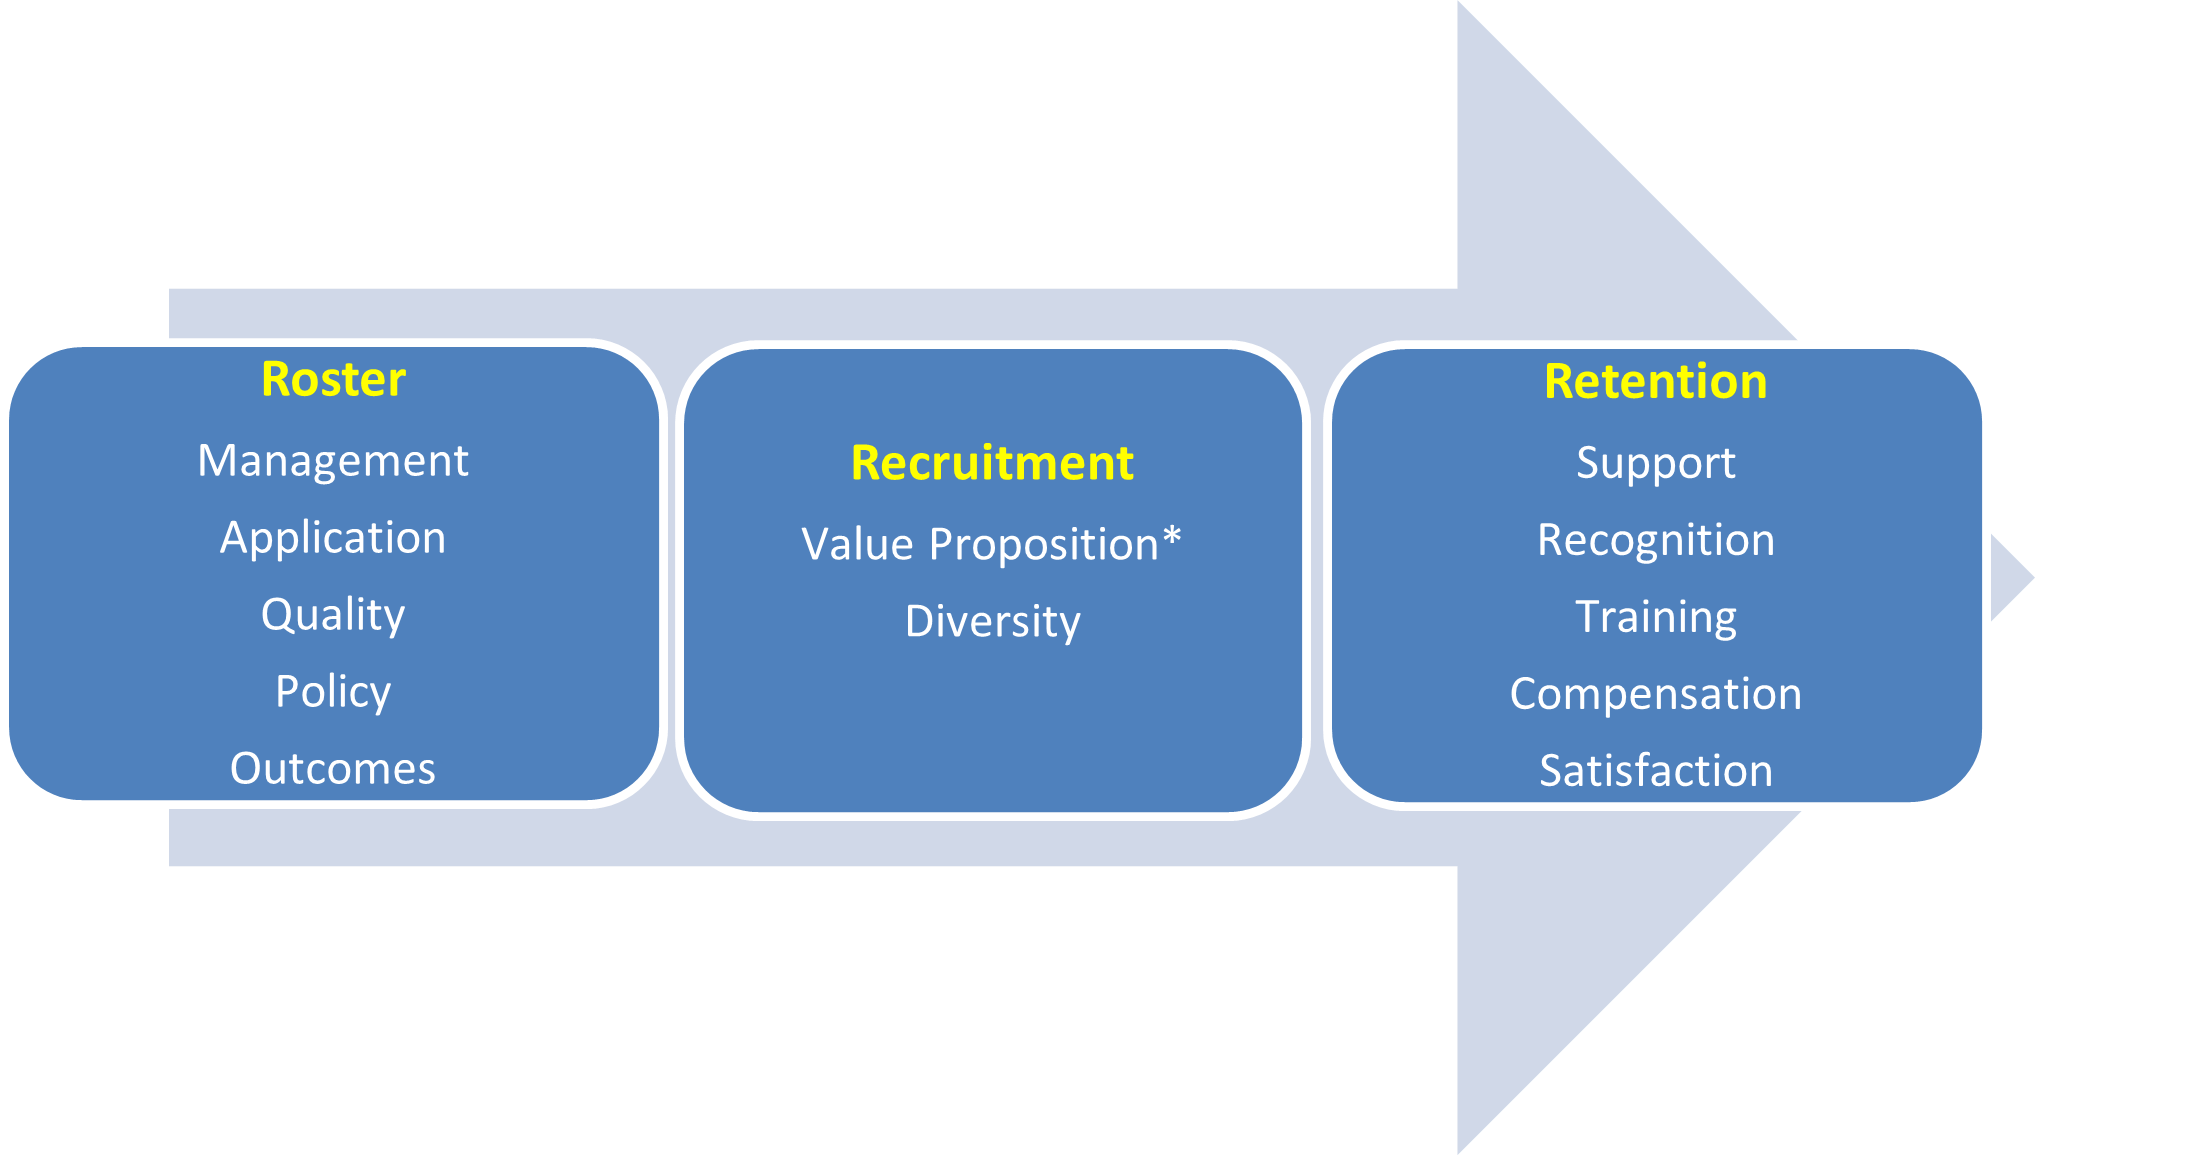 Tariff lawyer roster, recruitment, and retention diagram